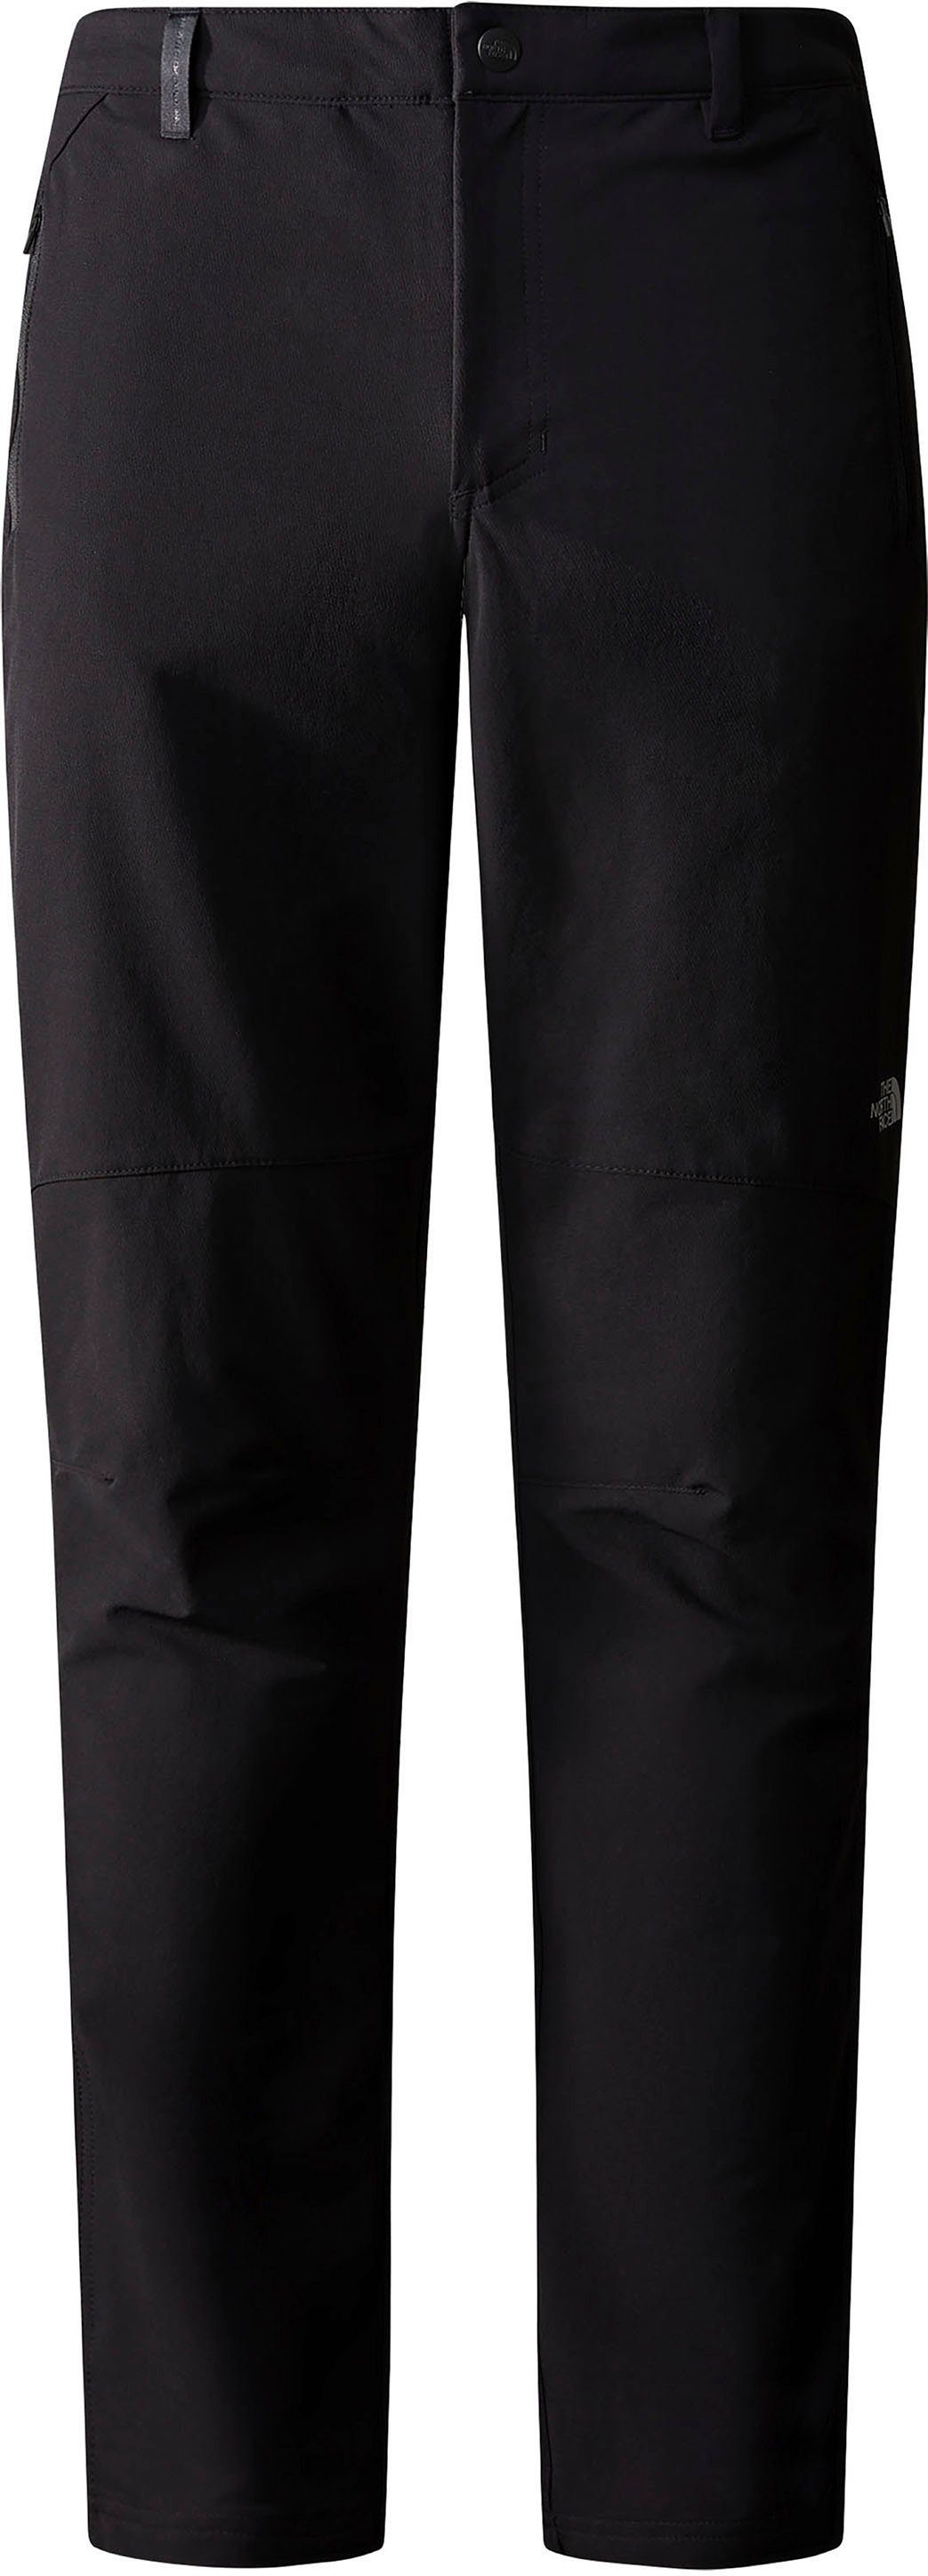 The North Face QUEST Logostickerei Outdoorhose M PANT SOFTSHELL kontrastfarbener mit FIT) (REGULAR